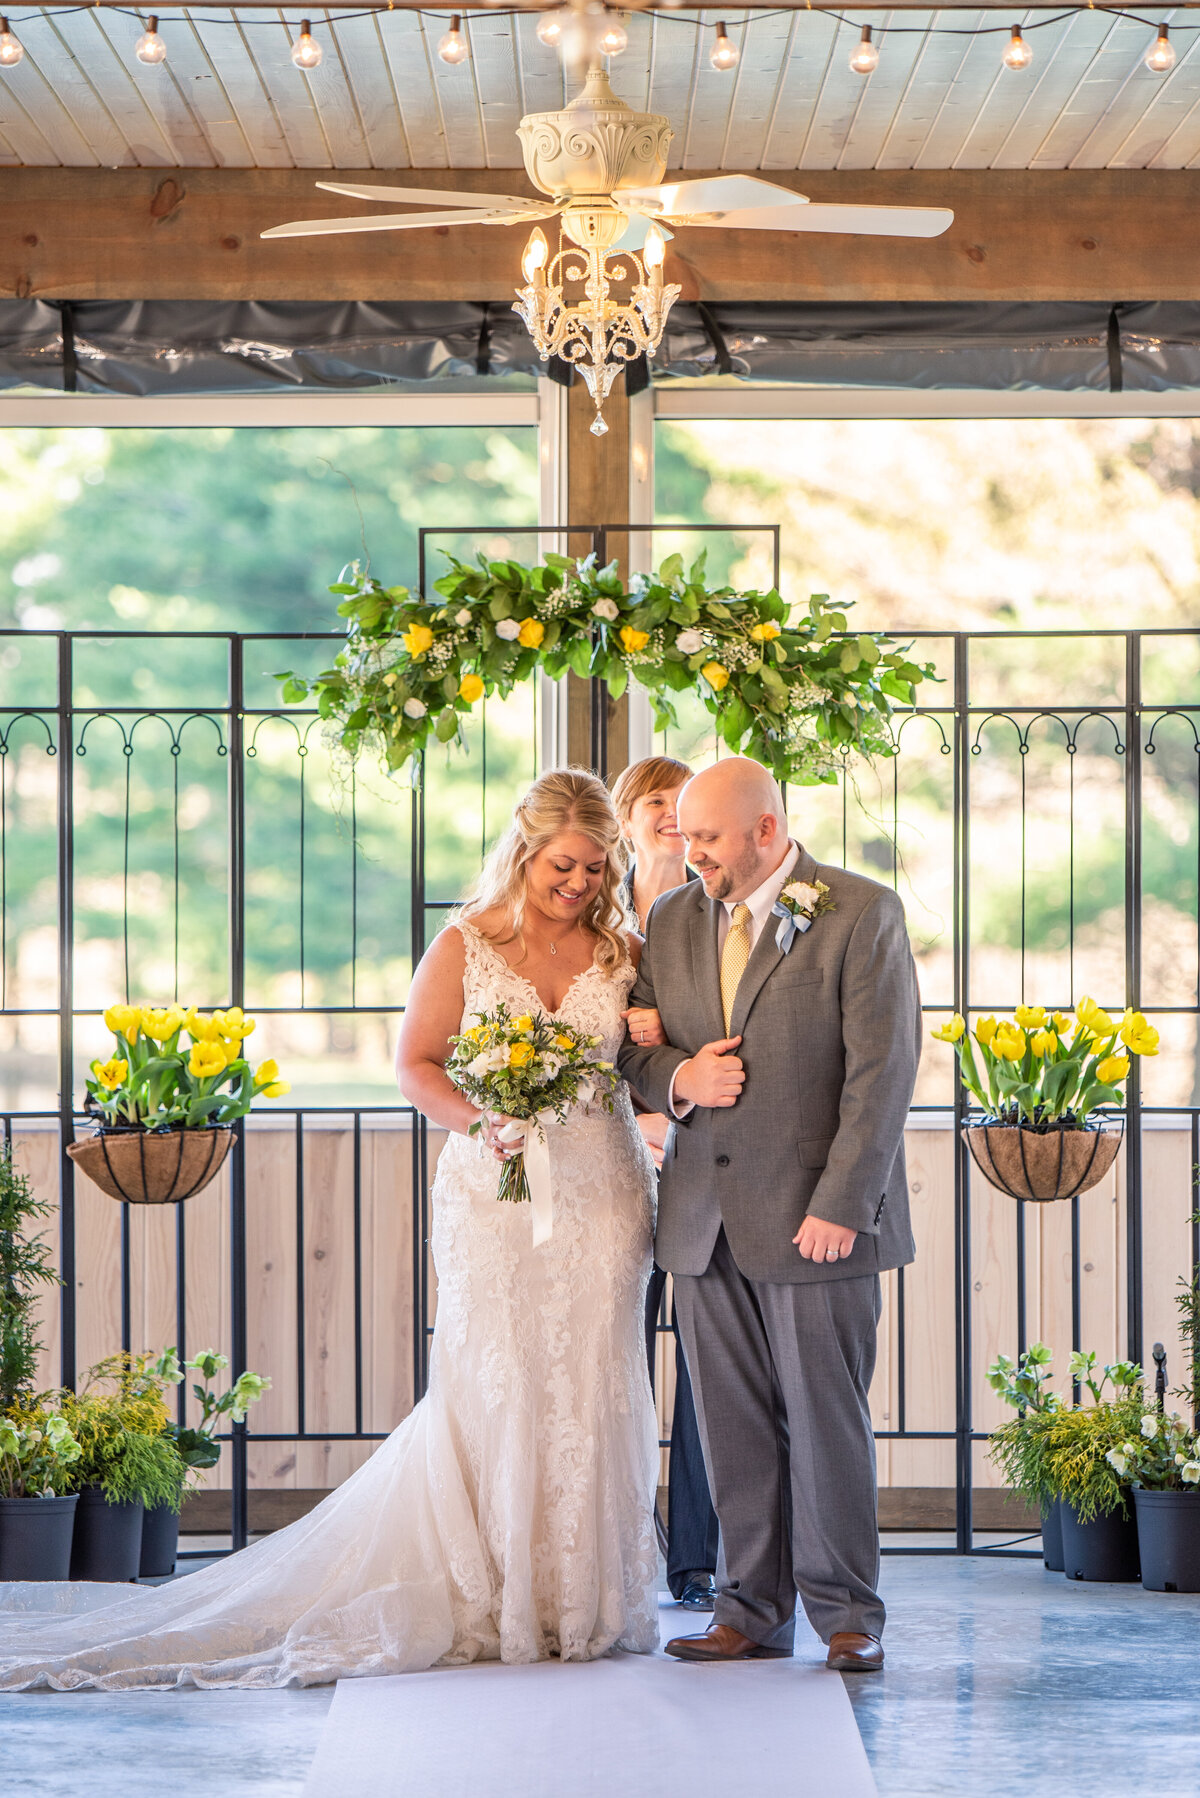 Spring wedding at the Stables at Arrowhead Lake n Millersburg, Ohio